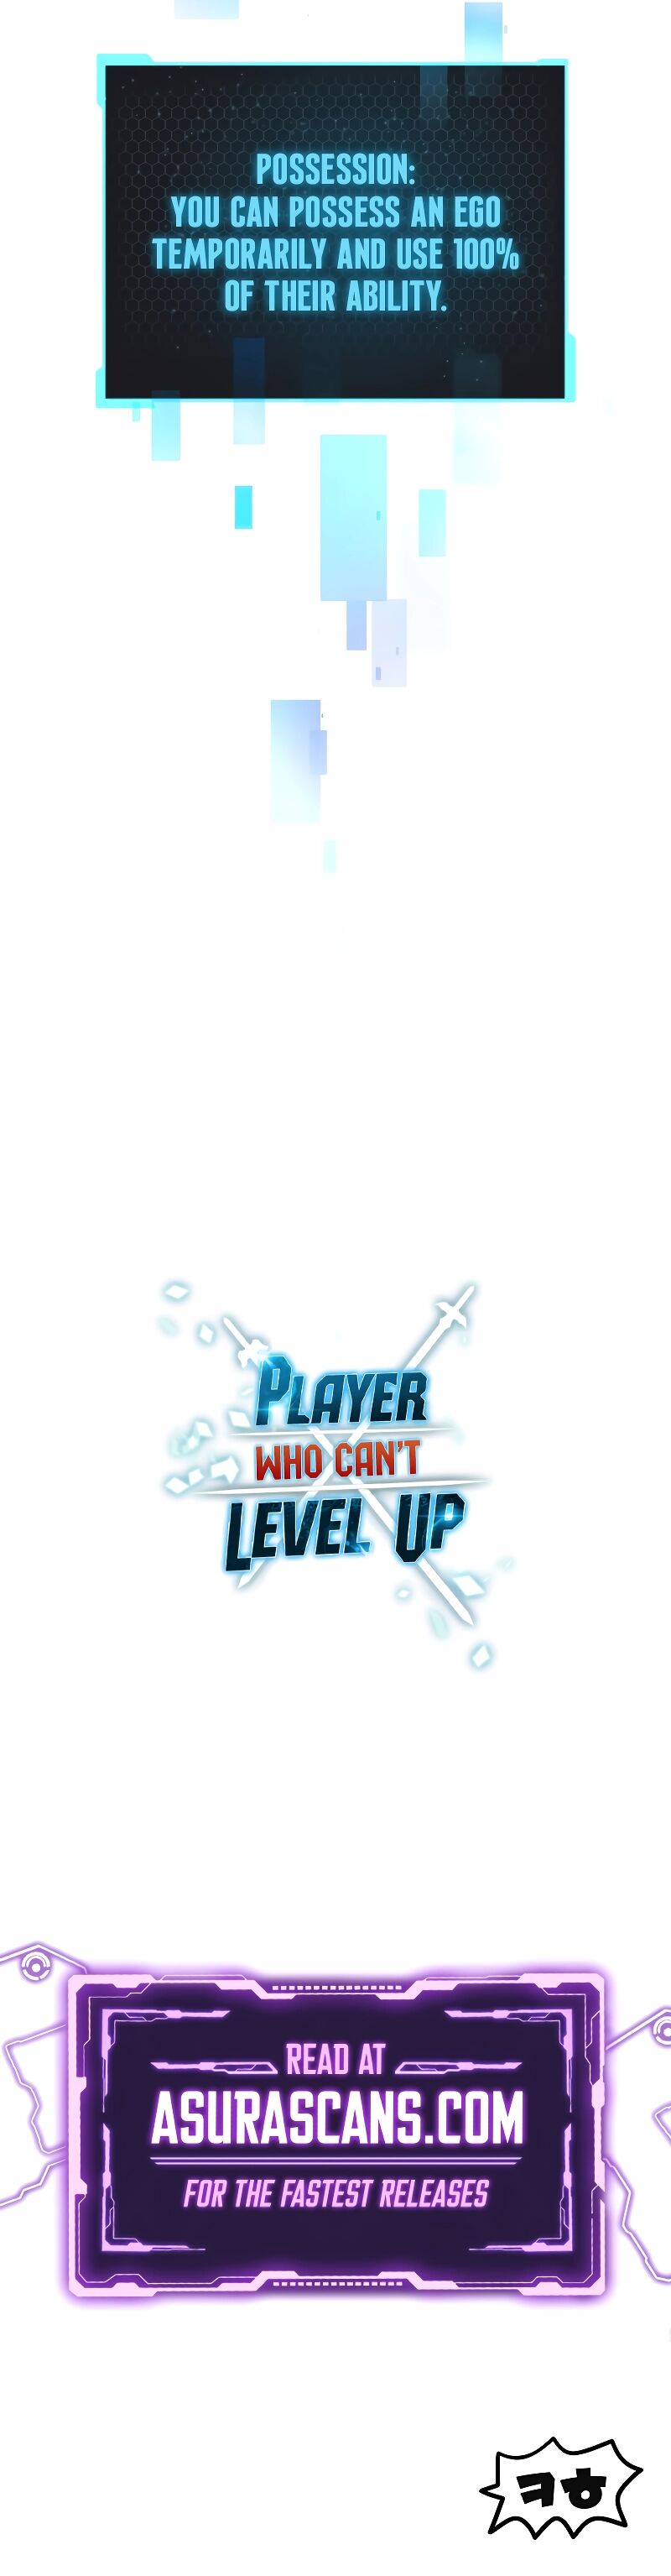 Player Who Can’t Level Up image